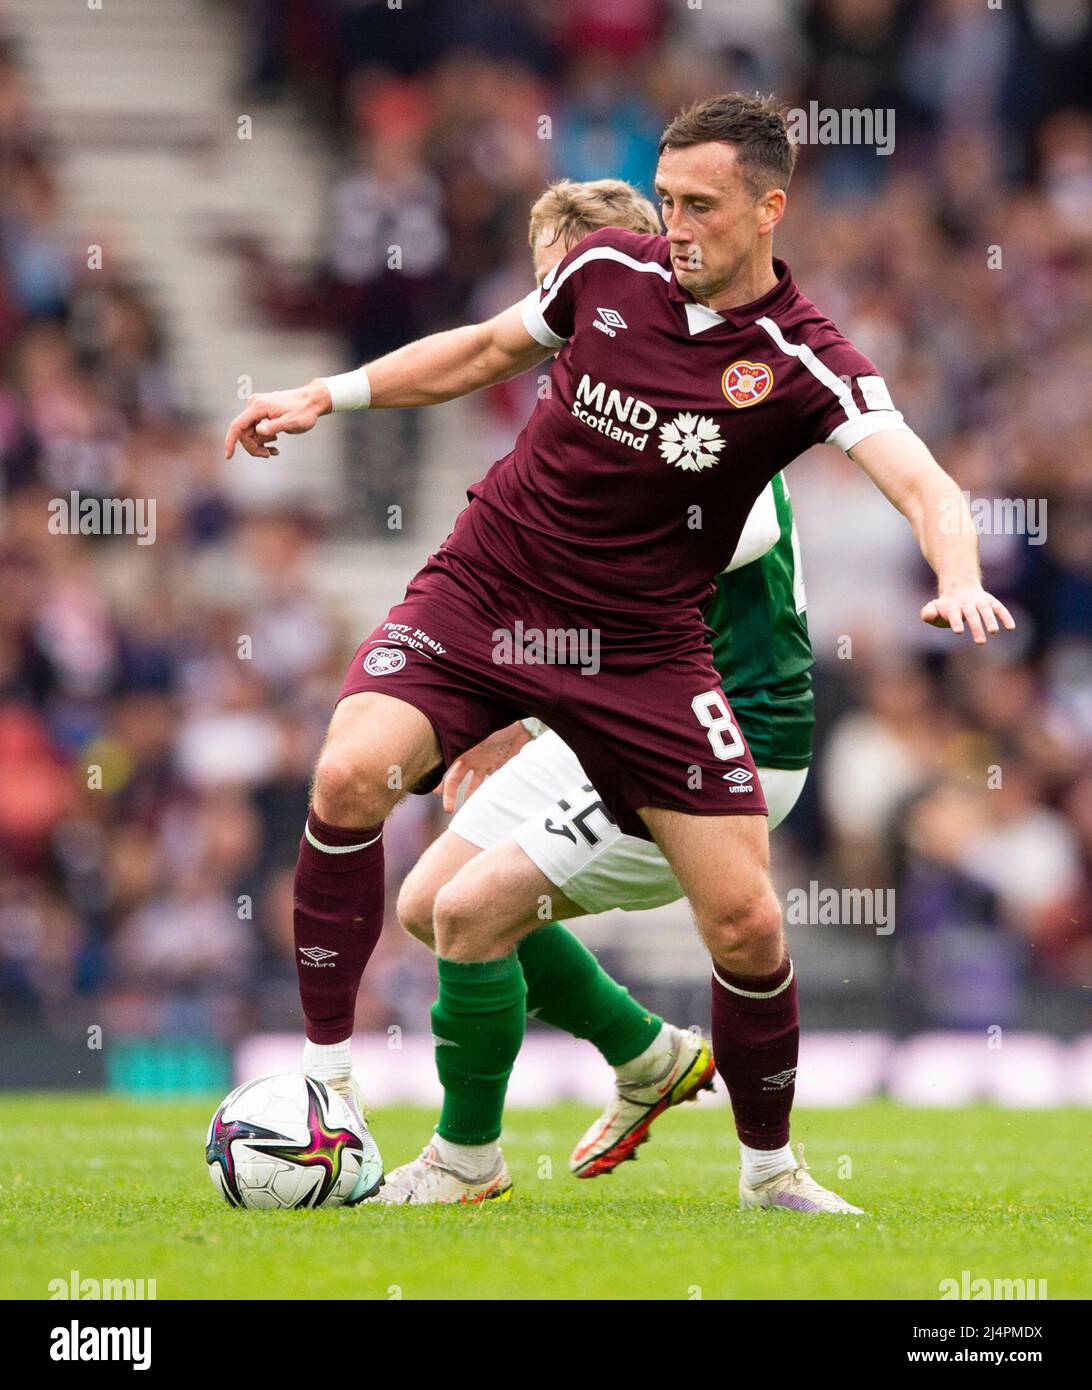 Glasgow, UK. 07th Apr, 2022. Scottish Cup semi final - Heart of Midlothian FC v Hibernian FC 07/04/2022 Pic shows: Hearts' Irish midfielder, Aaron Mceneff, gets the ball under control as Hearts take on Hibs in the Scottish Cup semi final at Hampden Park, Glasgow Credit: Ian Jacobs/Alamy Live News Stock Photo